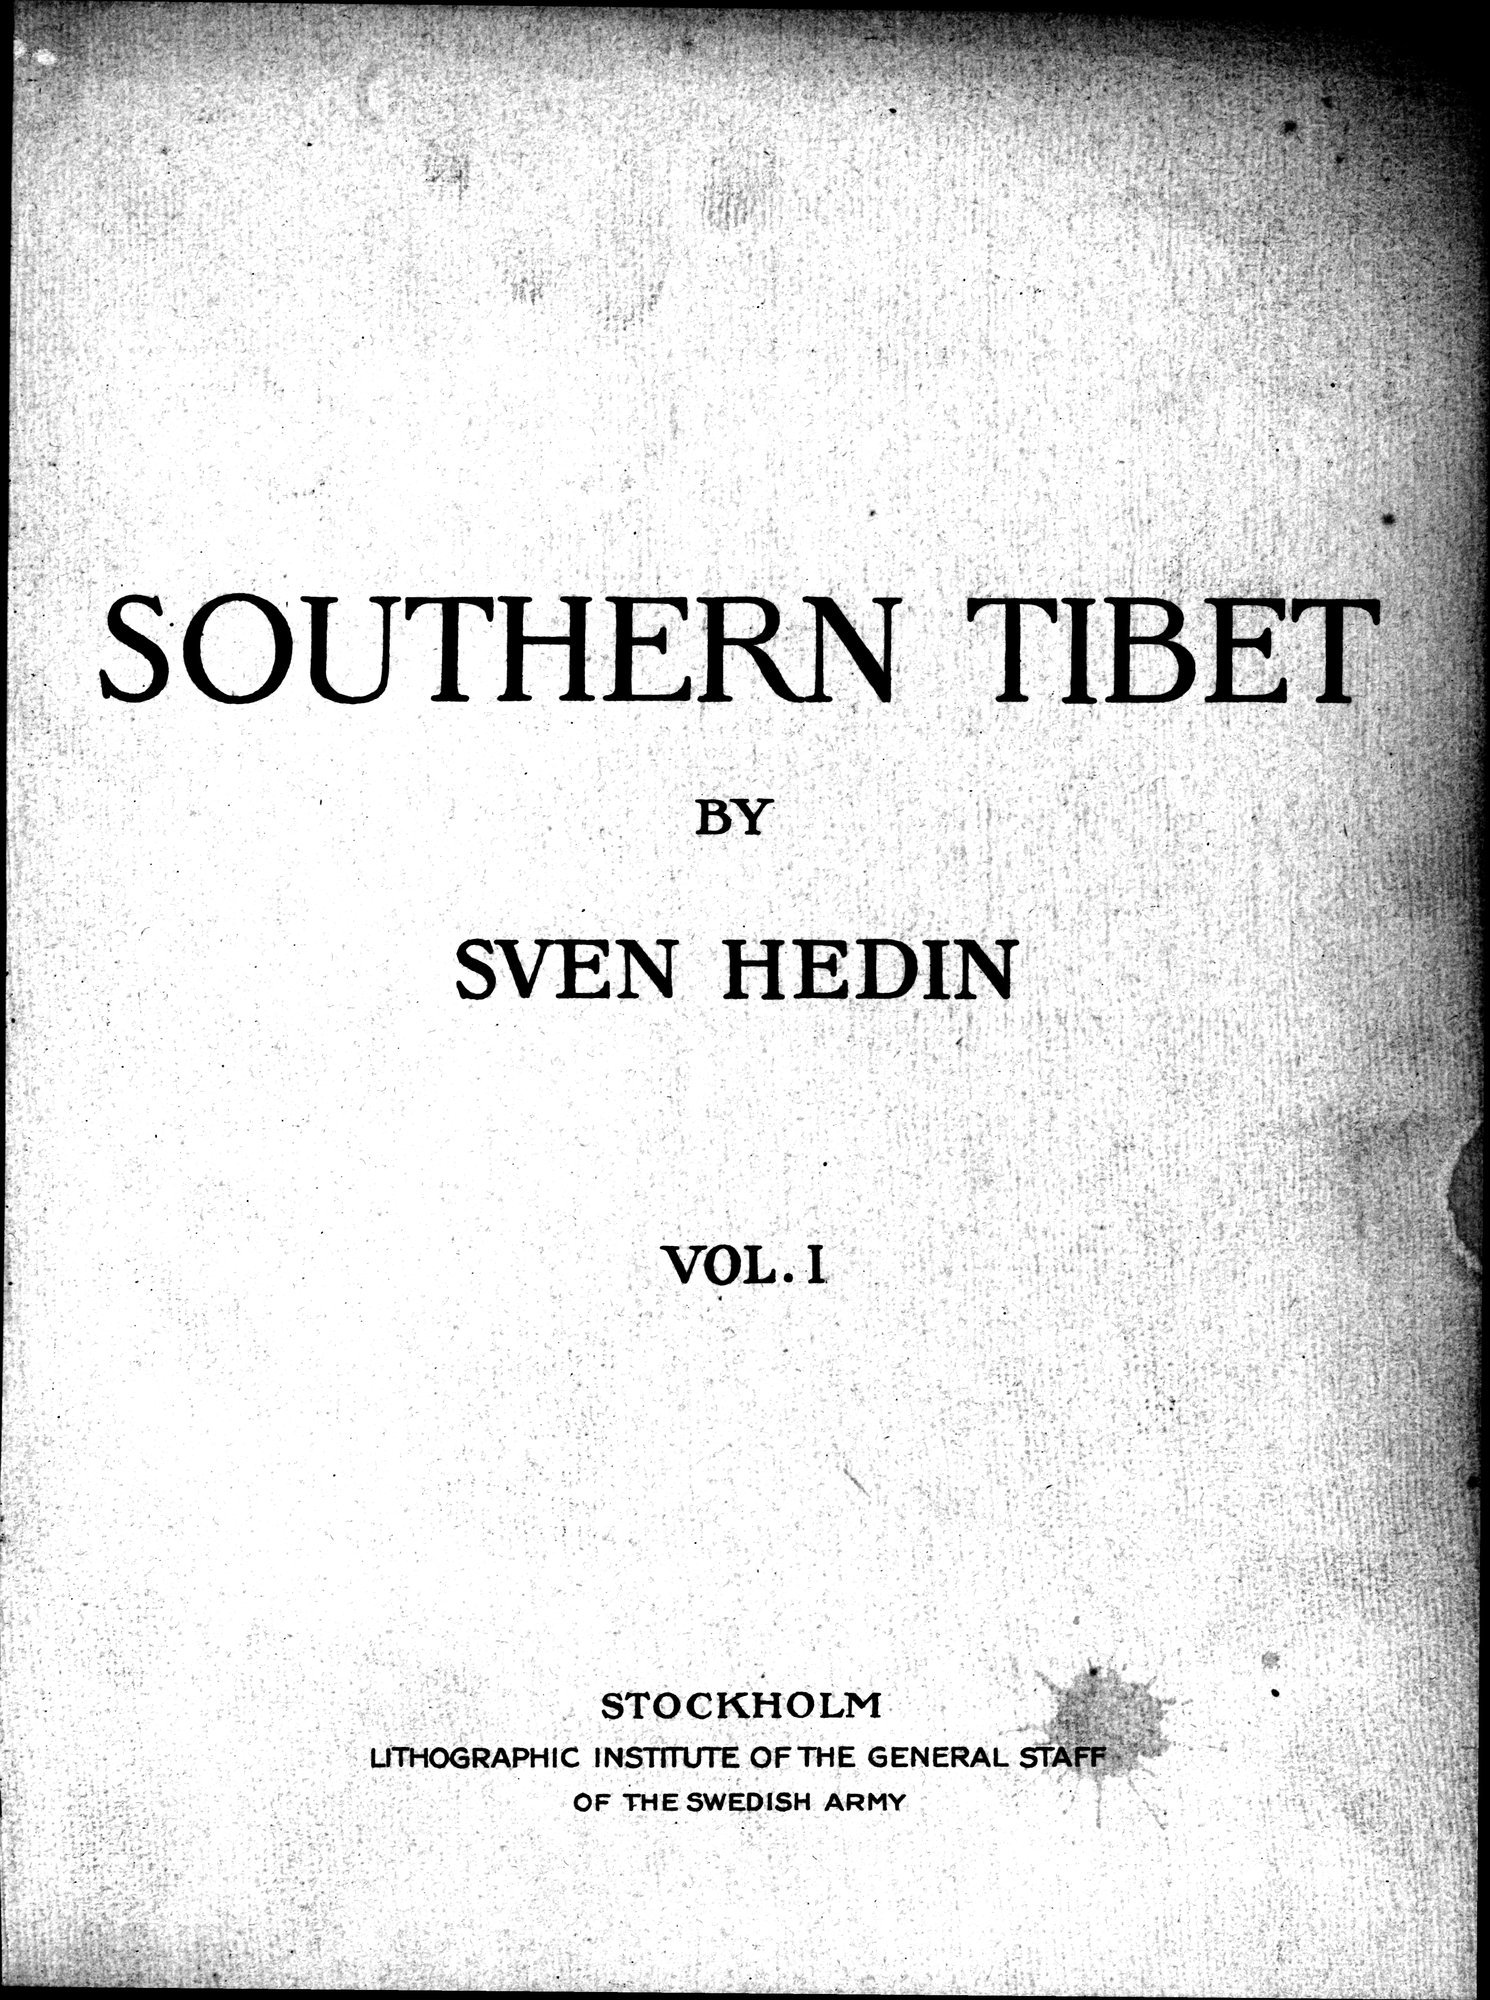 Southern Tibet : vol.1 / Page 7 (Grayscale High Resolution Image)